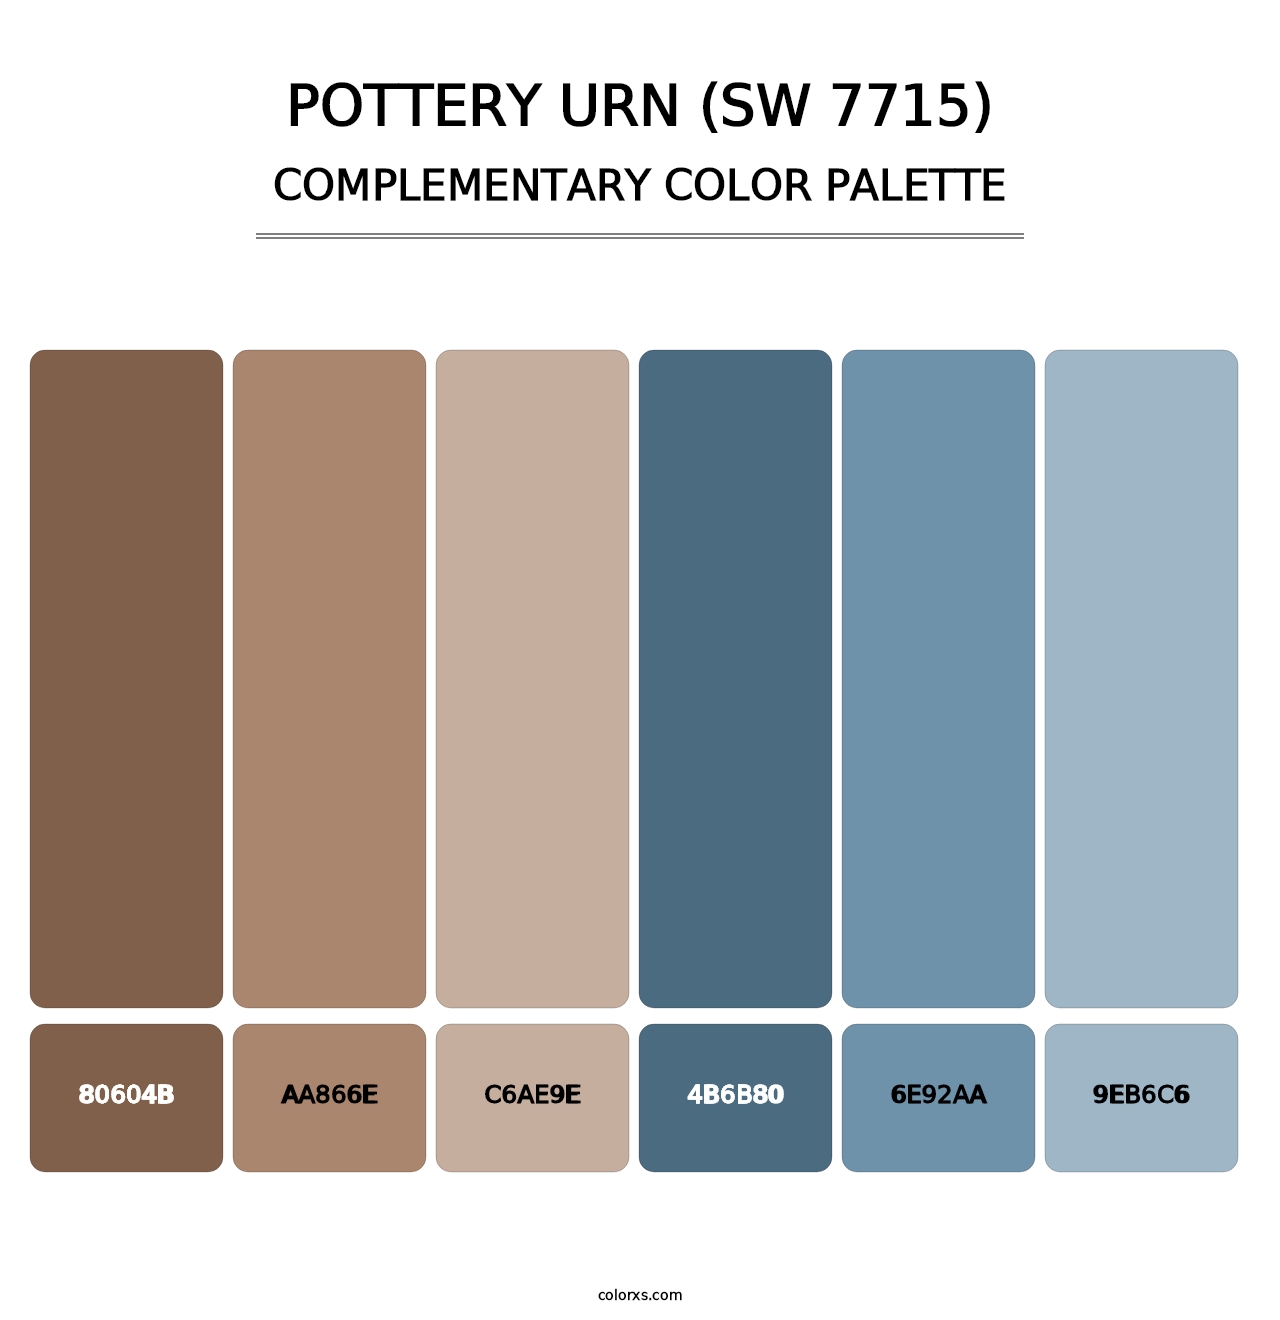 Pottery Urn (SW 7715) - Complementary Color Palette